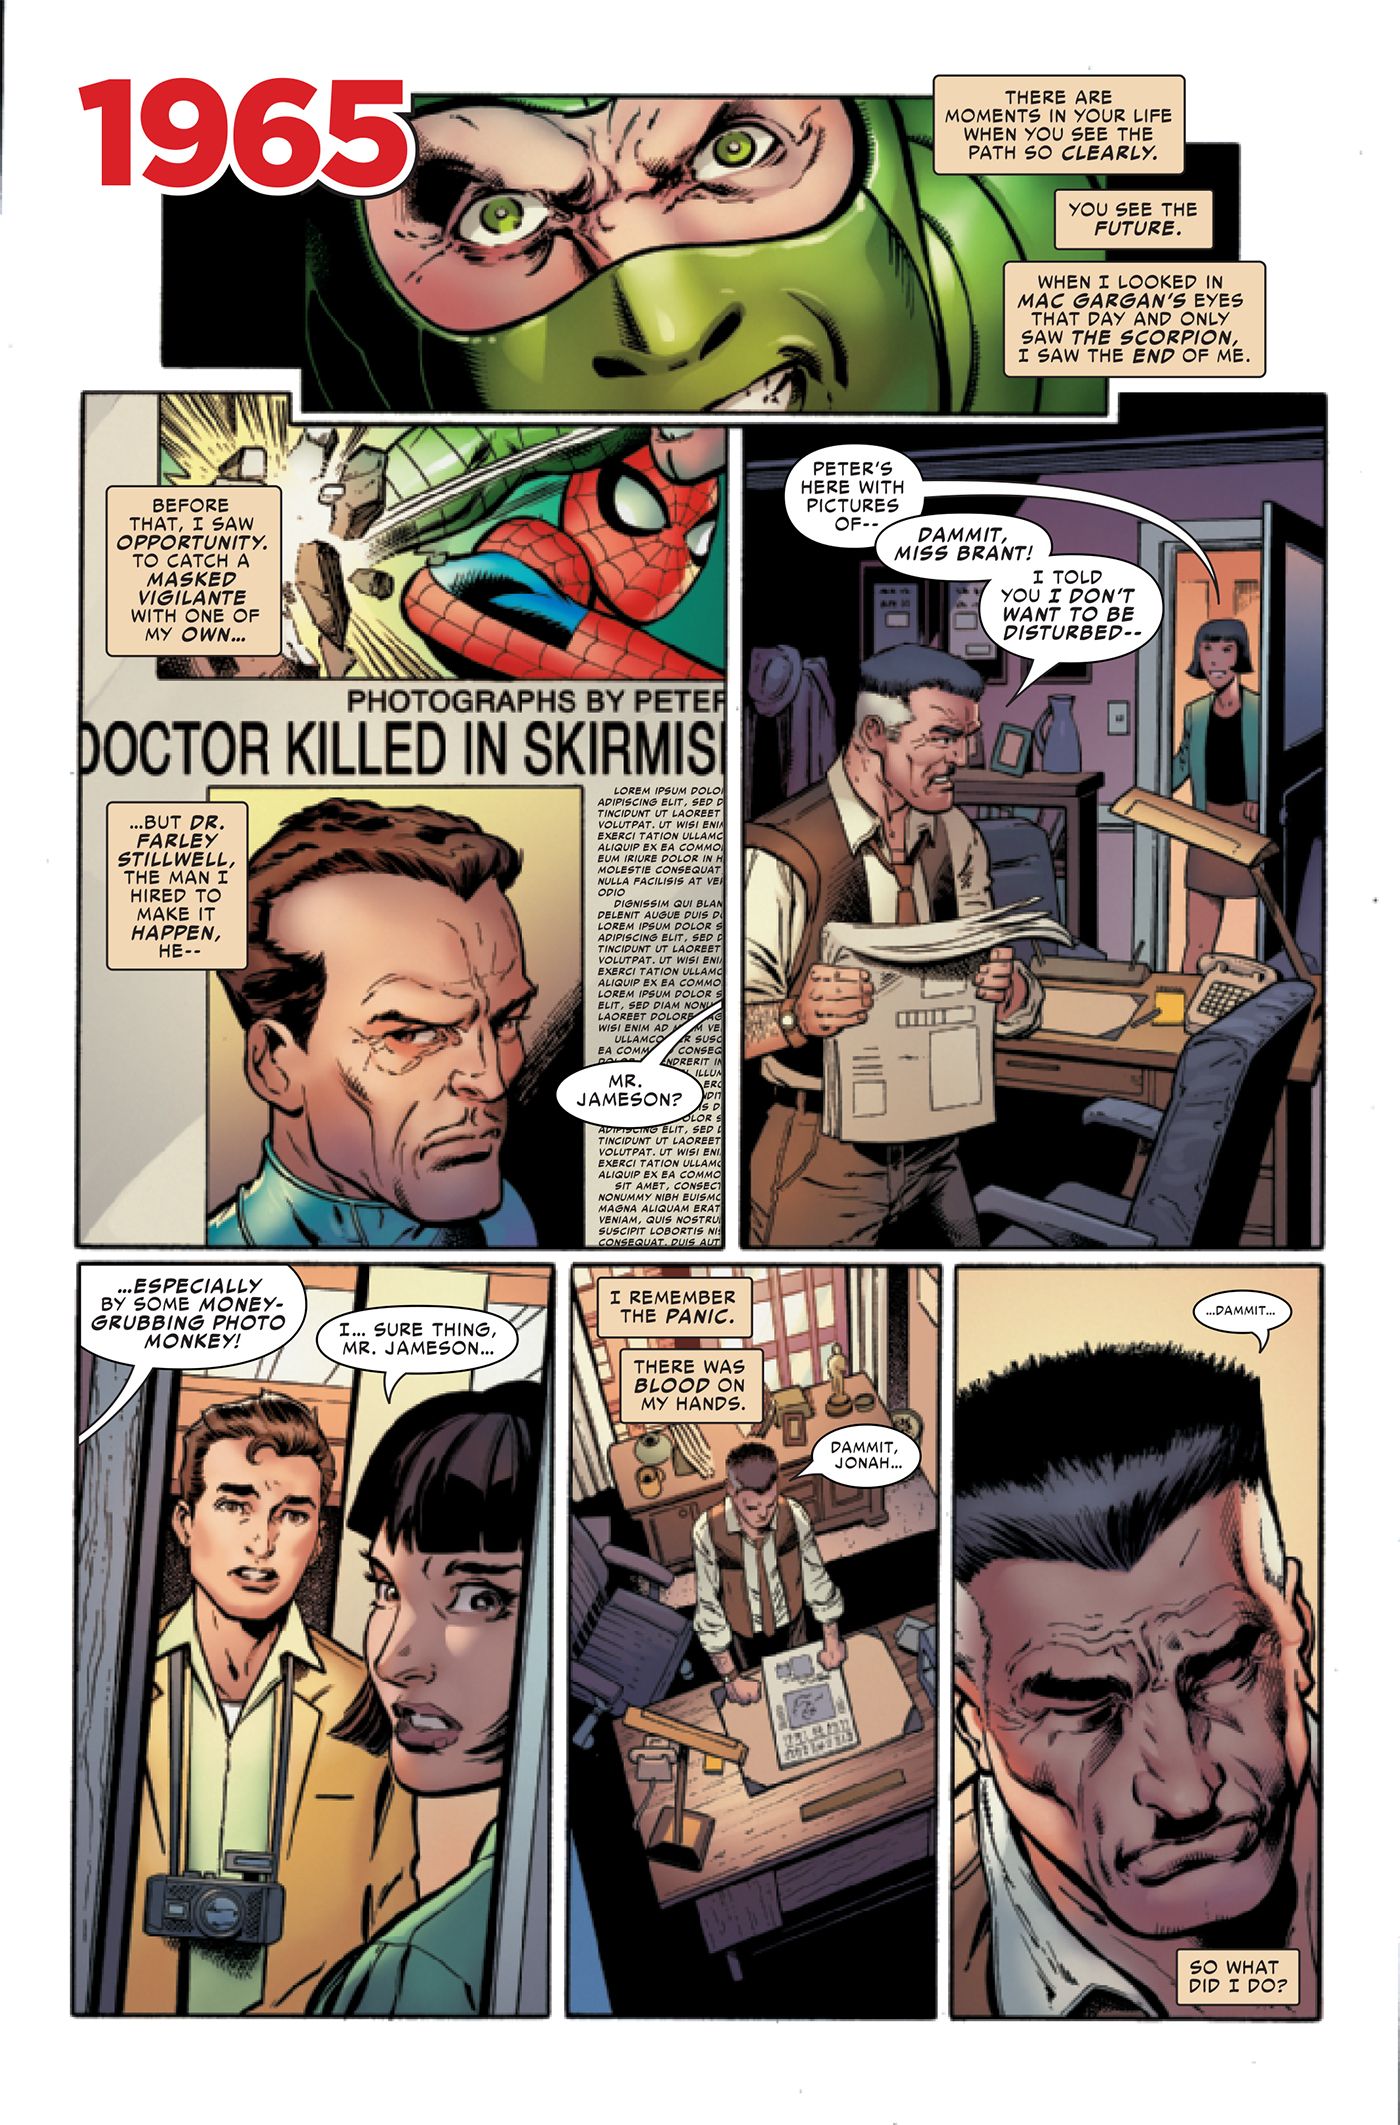 J. Jonah Jameson thinks on why he wants to bring Spider-Man down.